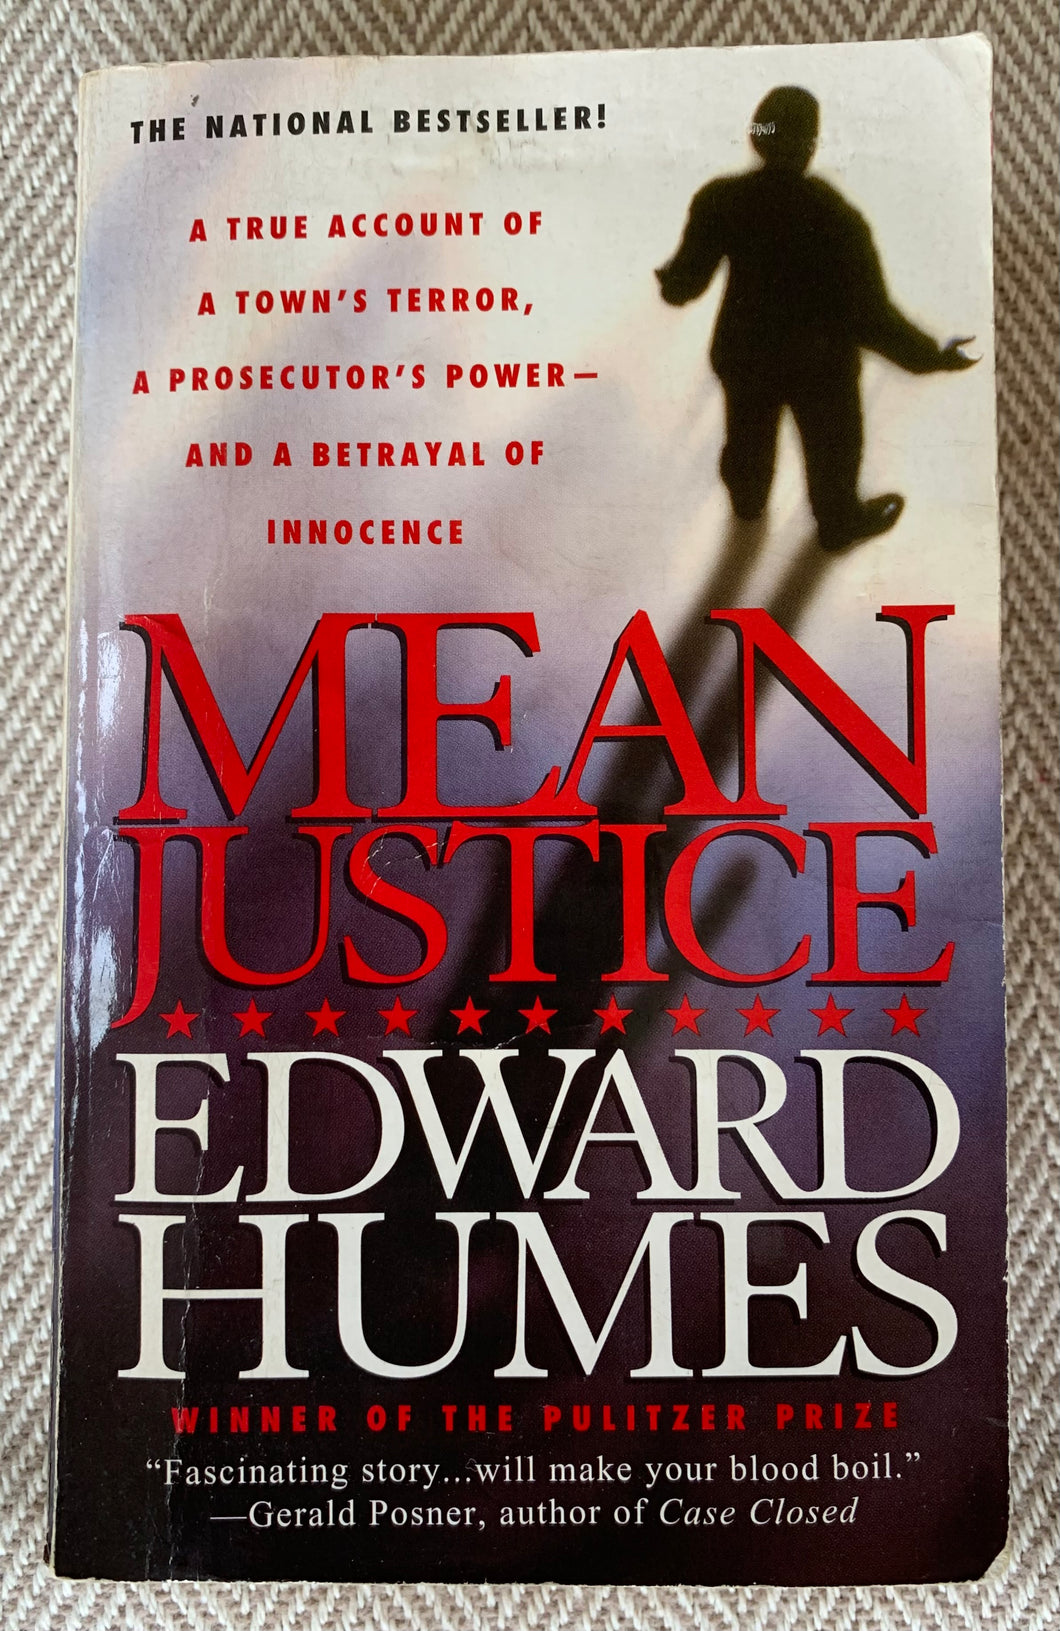 Mean Justice: A True Account Of A Town's Terror, A Prosecutor's Power -- And A Betrayal Of Innocence